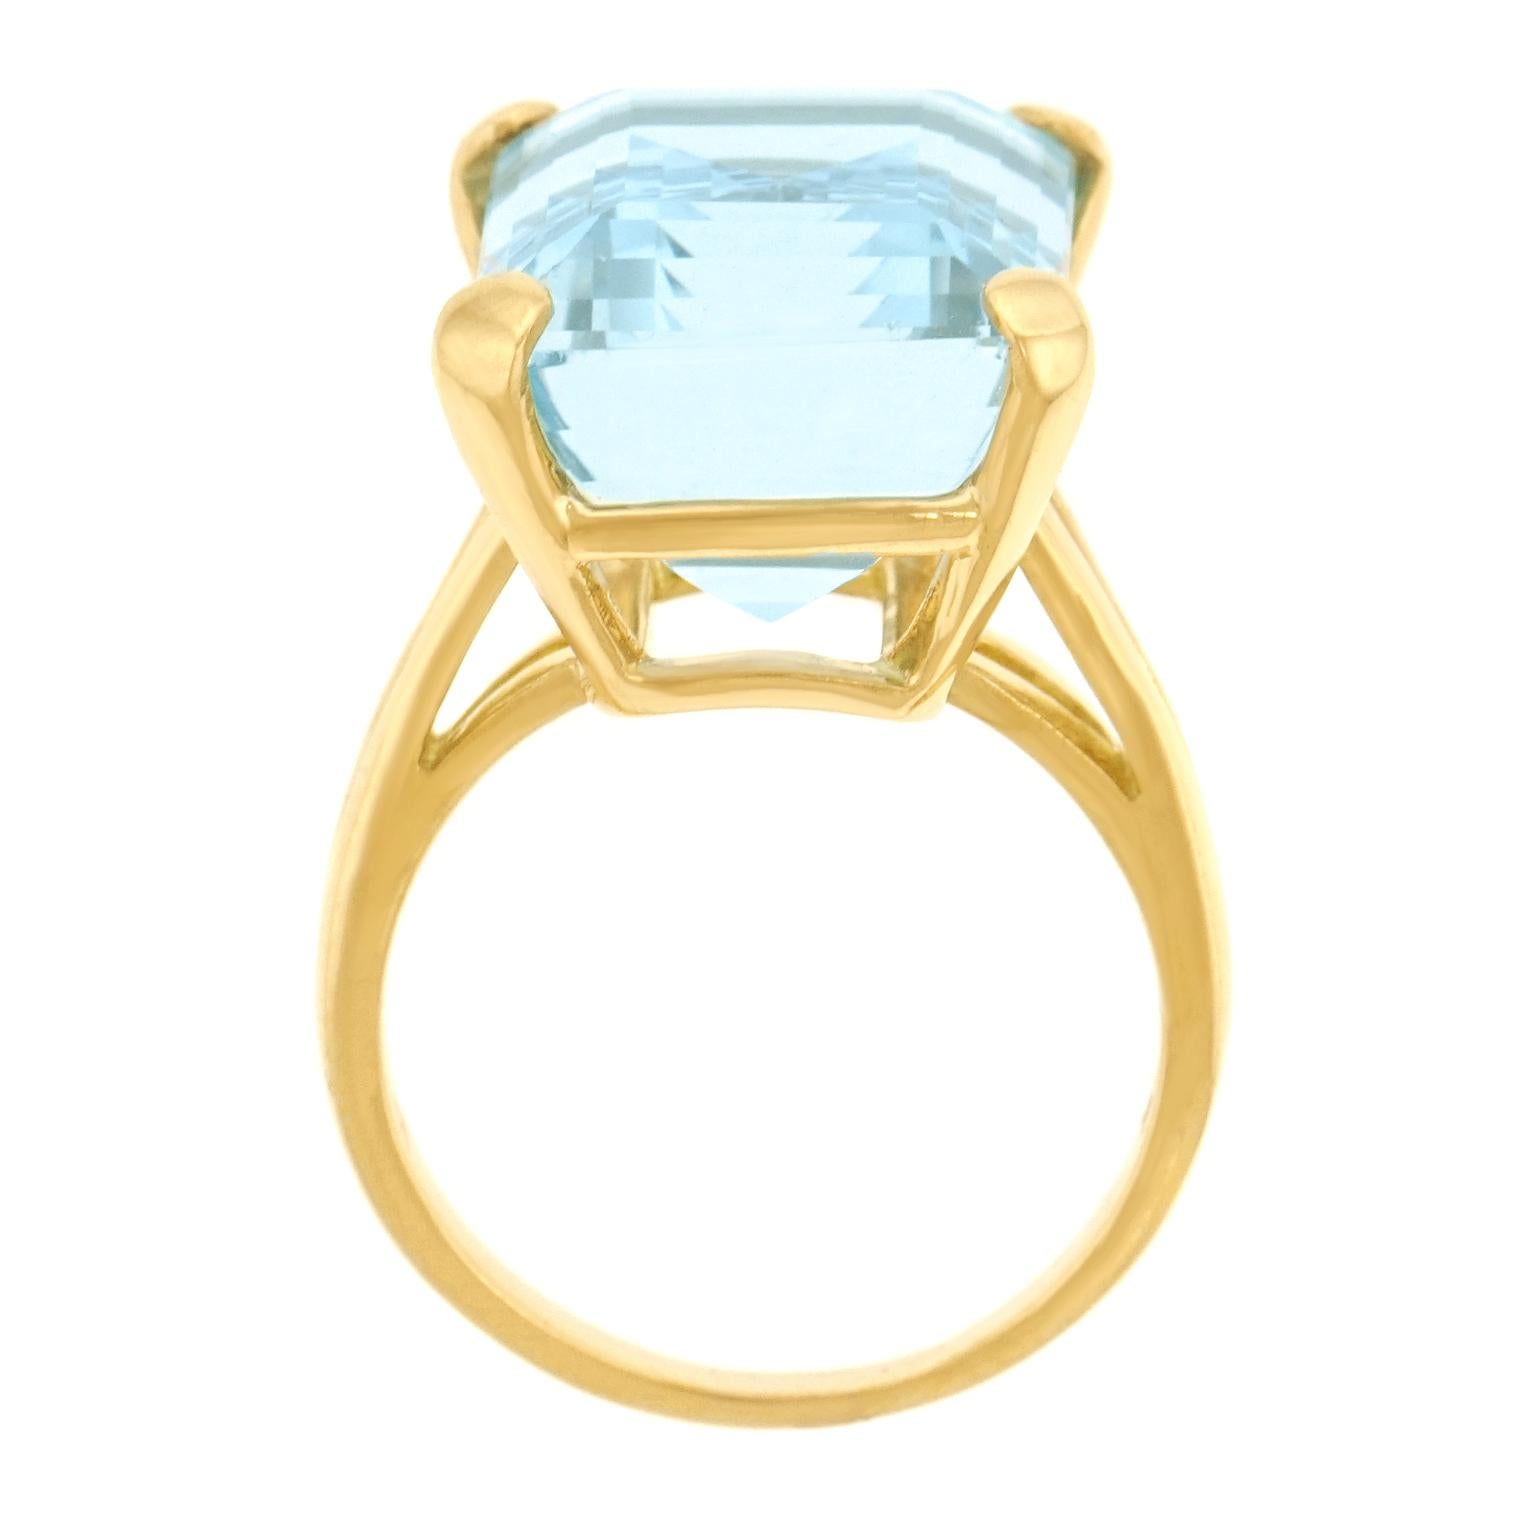 17.38 Carat Aquamarine Ring by Lawrence Jeffrey in Gold 3